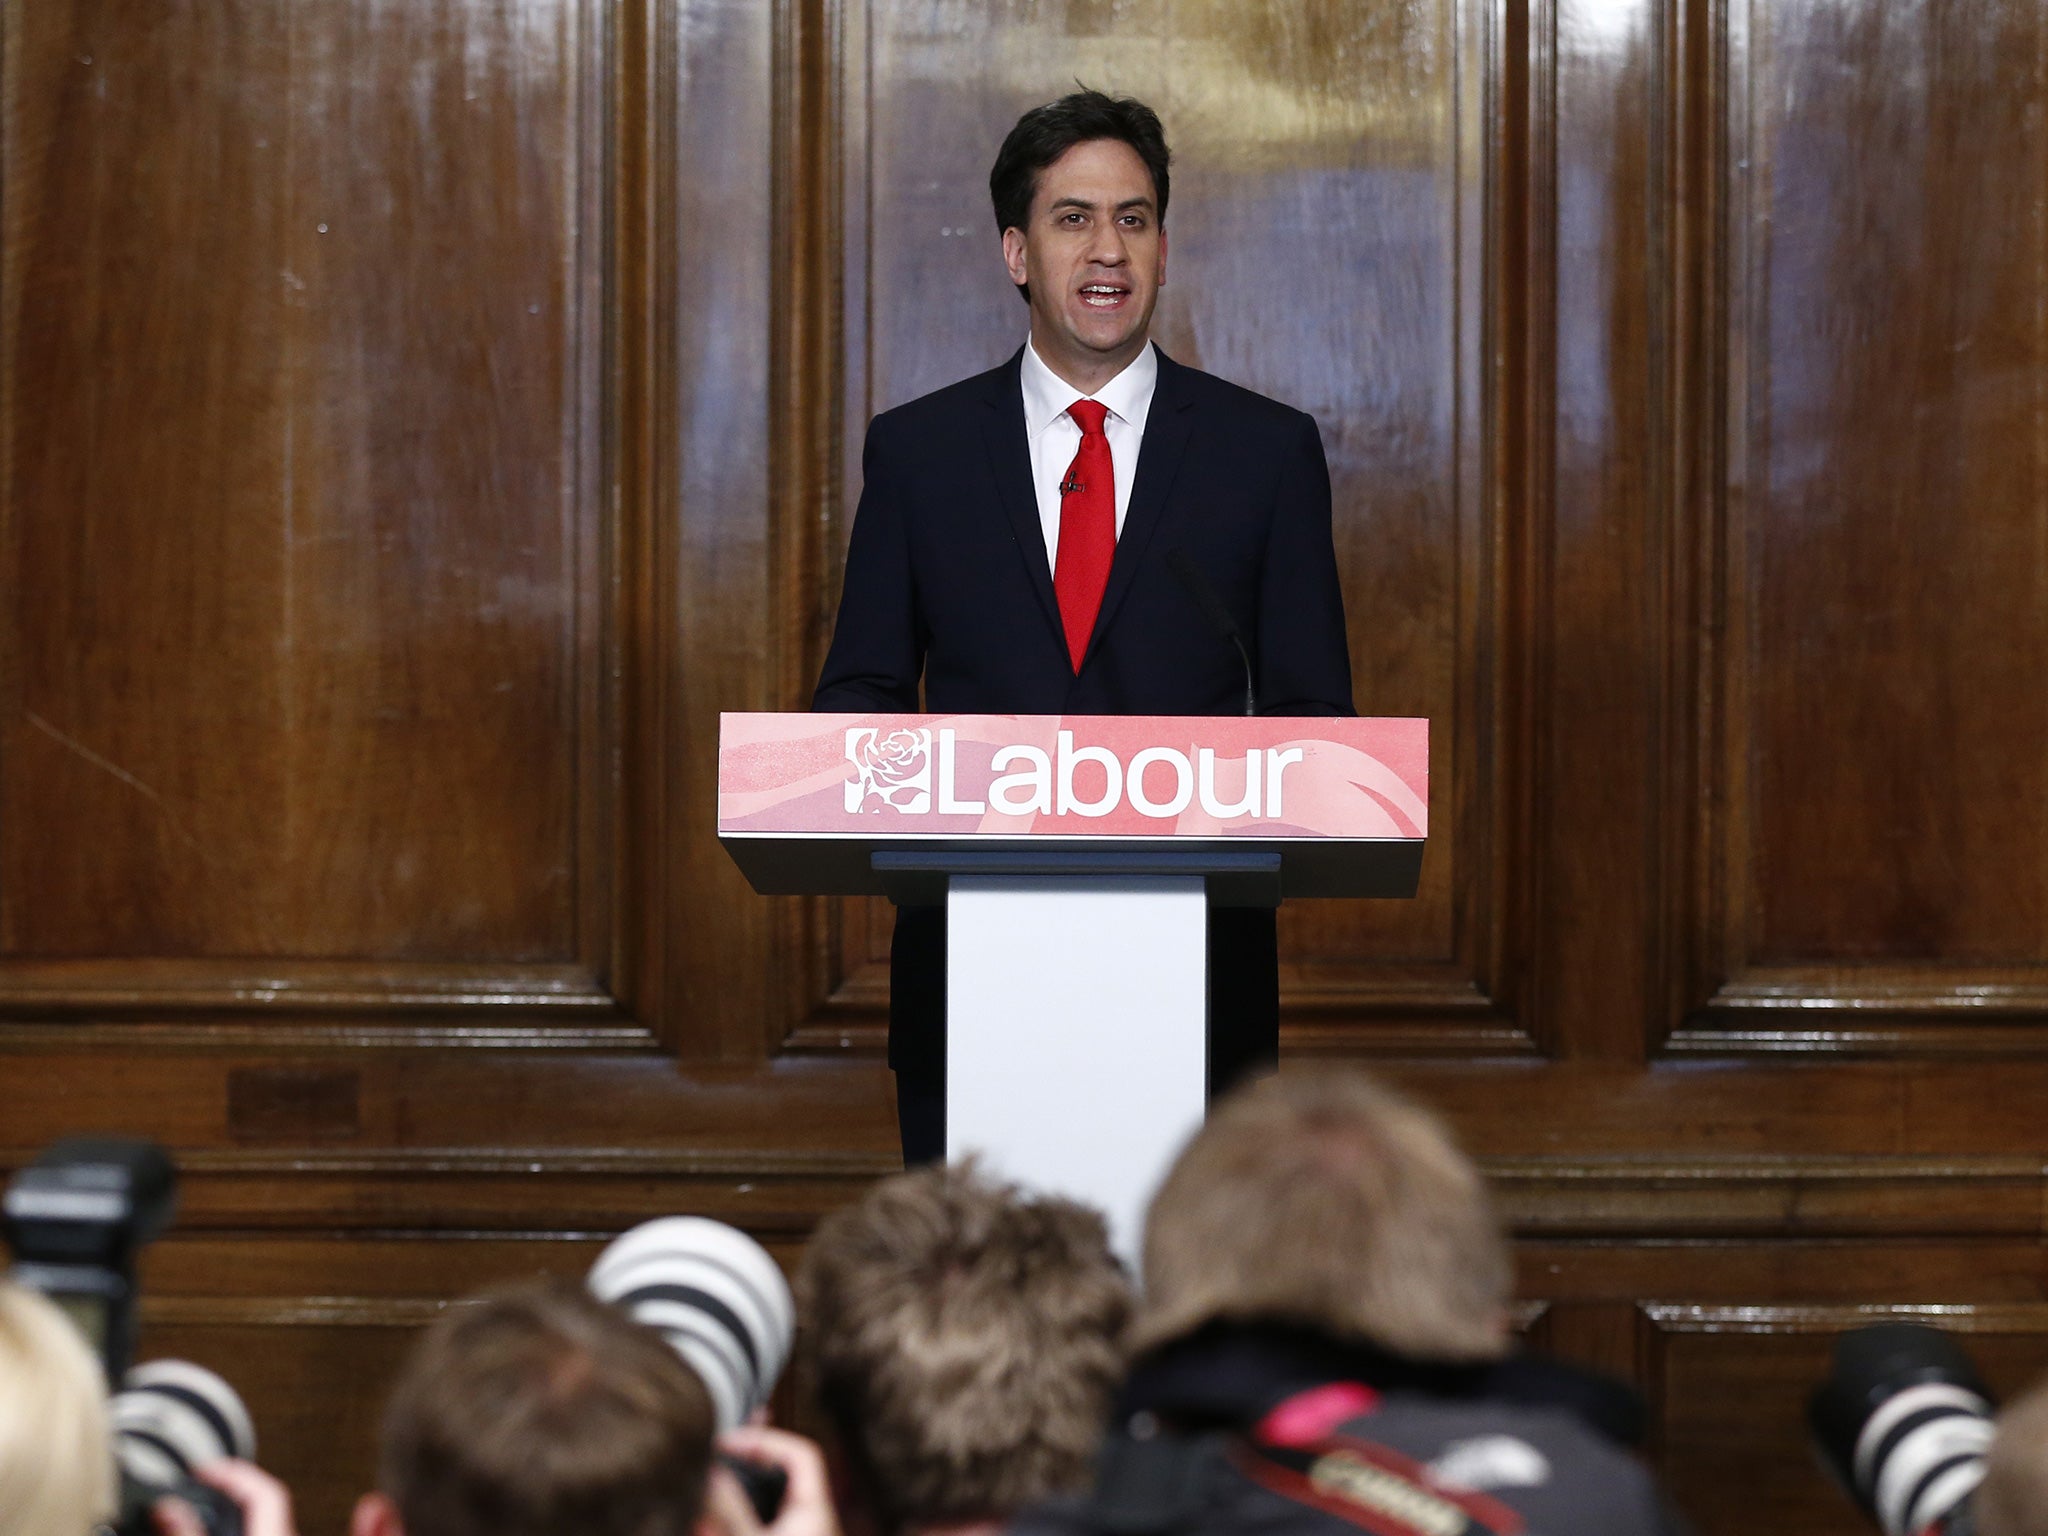 Miliband accepted "total responsibility" for Labour's showing (Getty)